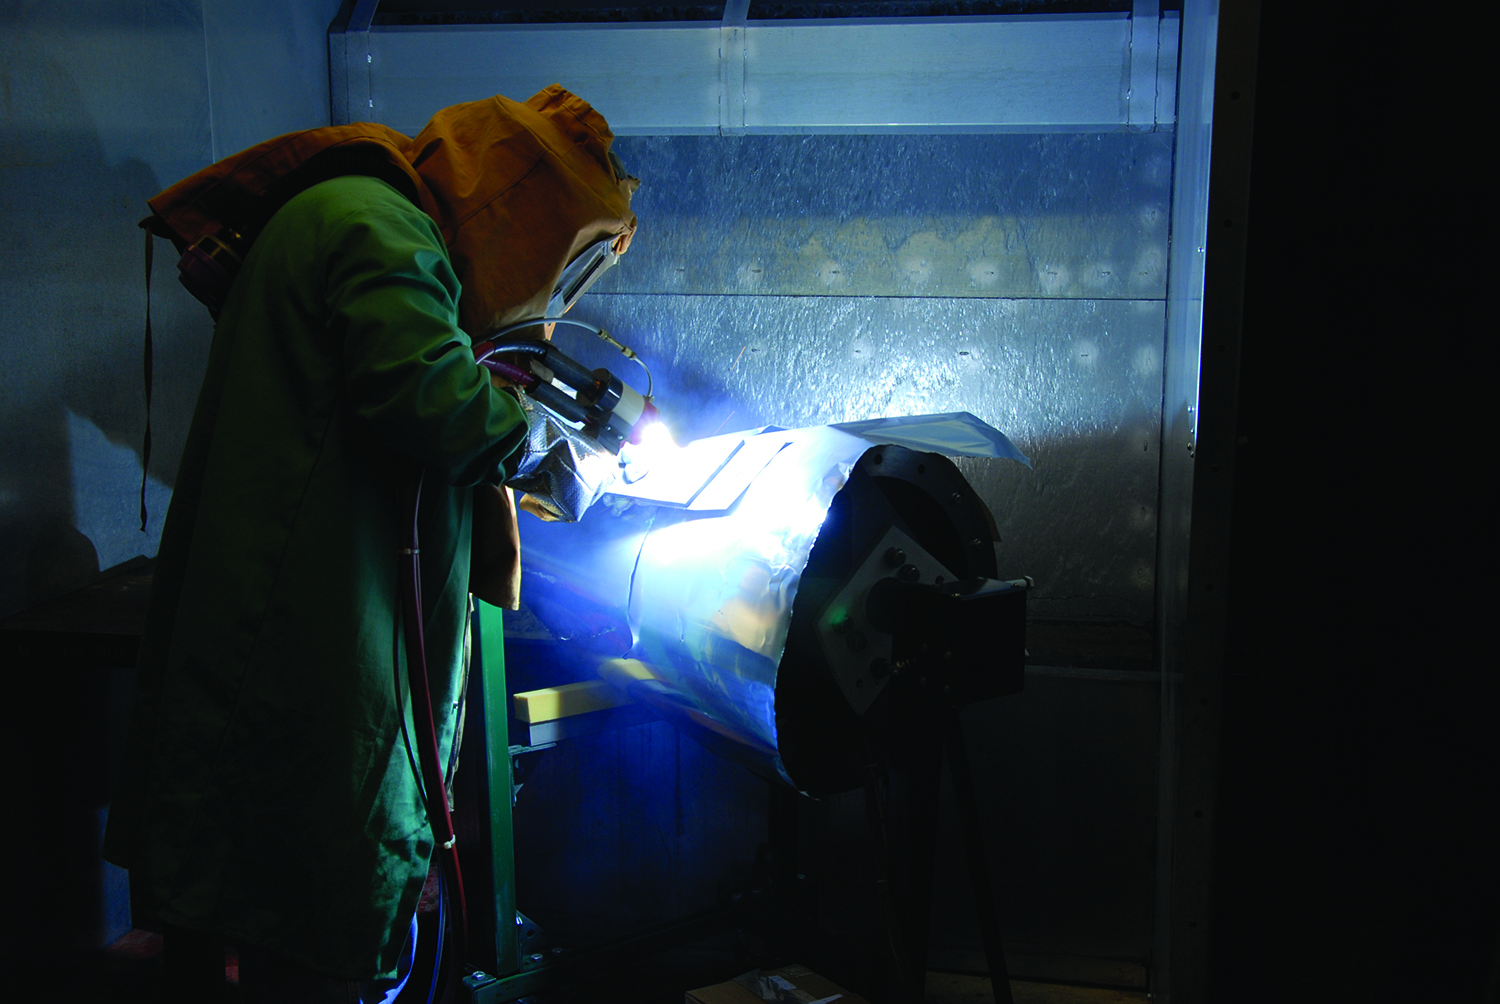 A man in gloves, a helmet, and a jacket, uses a torch to attach a high-temperature sensor.